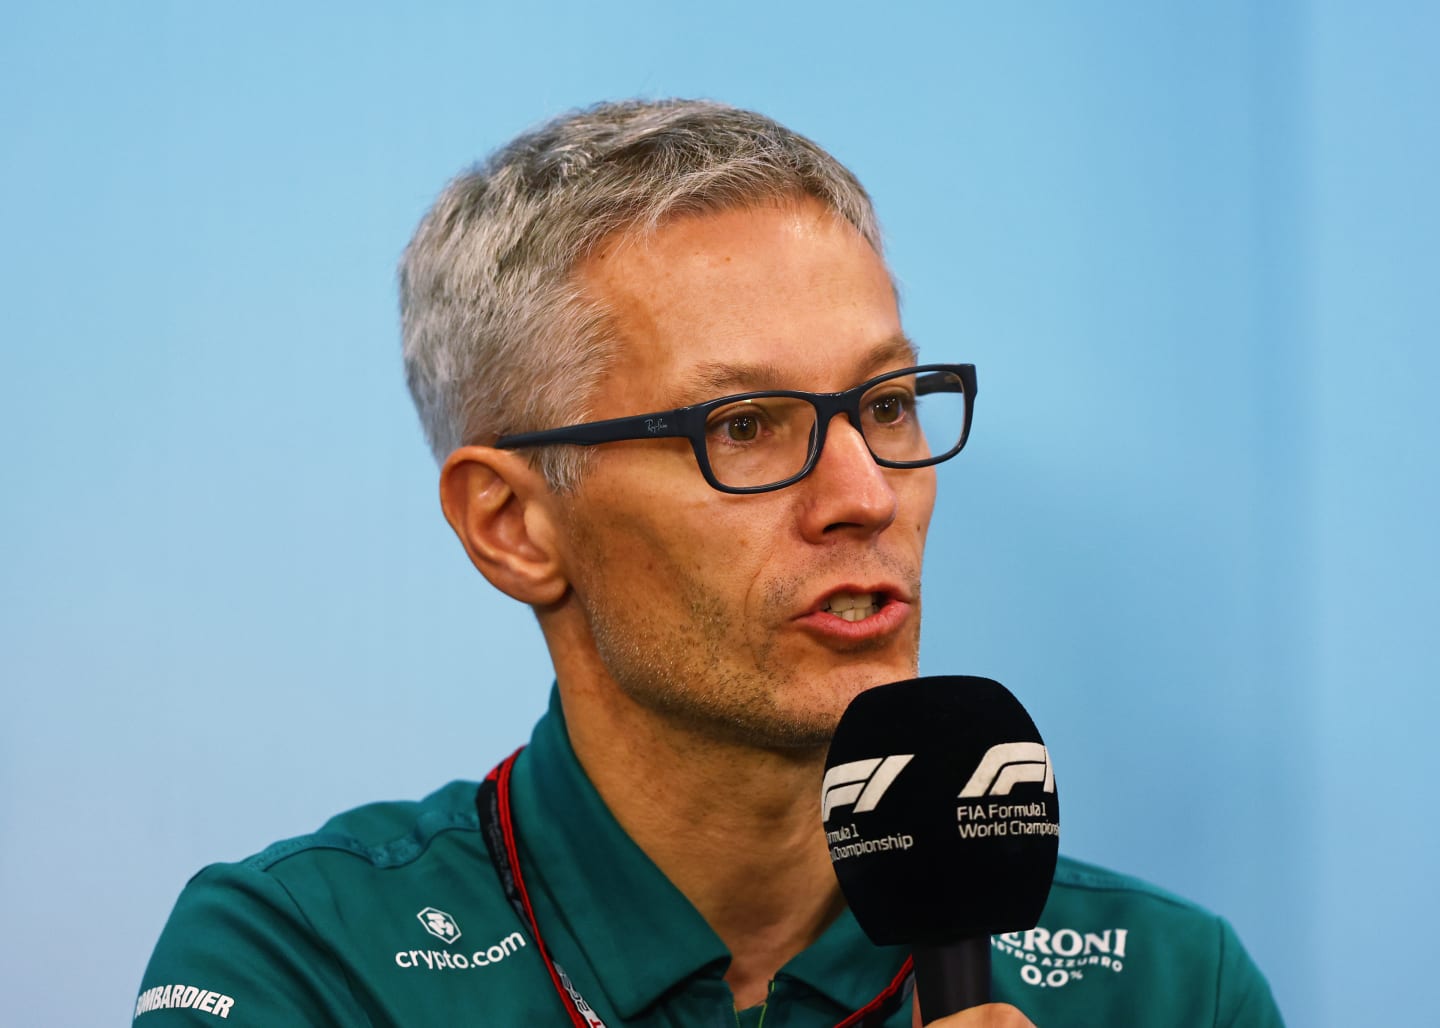 SUZUKA, JAPAN - OCTOBER 08: Mike Krack, Team Principal of the Aston Martin F1 Team attends the Team Principals Press Conference prior to final practice ahead of the F1 Grand Prix of Japan at Suzuka International Racing Course on October 08, 2022 in Suzuka, Japan. (Photo by Bryn Lennon/Getty Images)